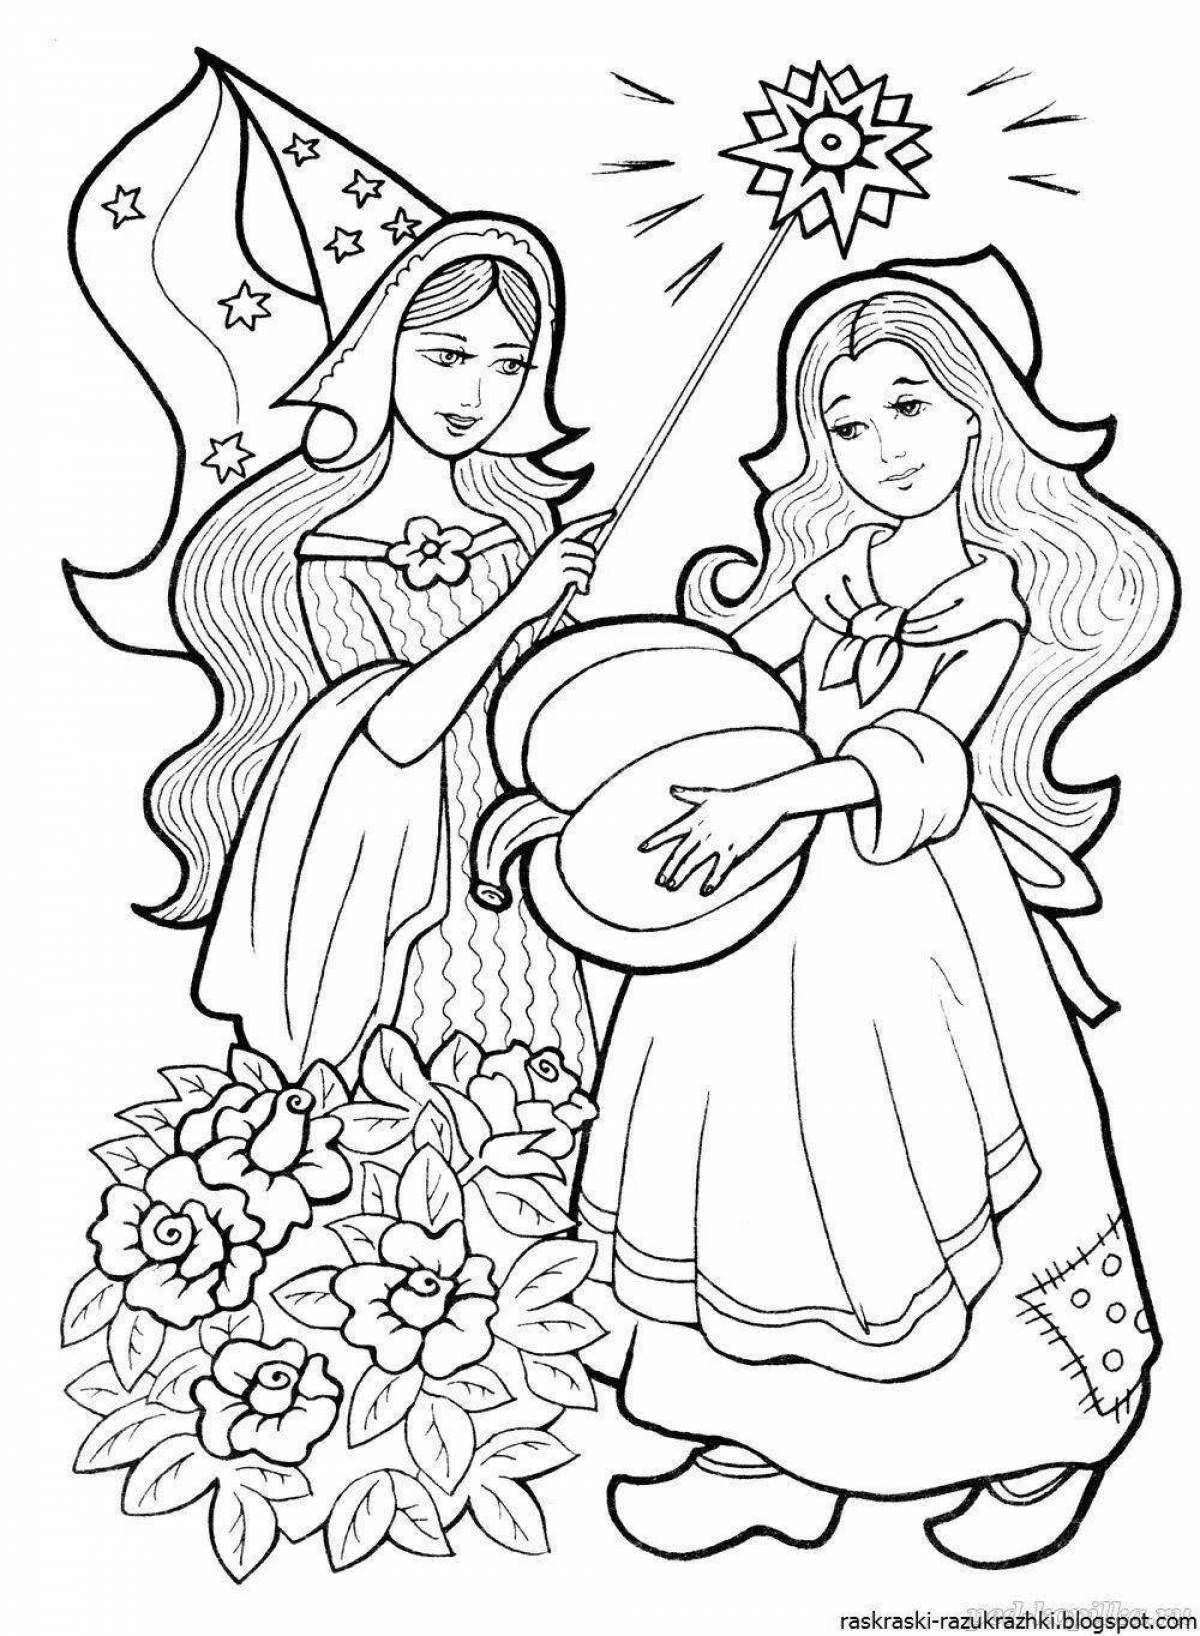 Inspirational coloring book of Perro's fairy tale for preschoolers